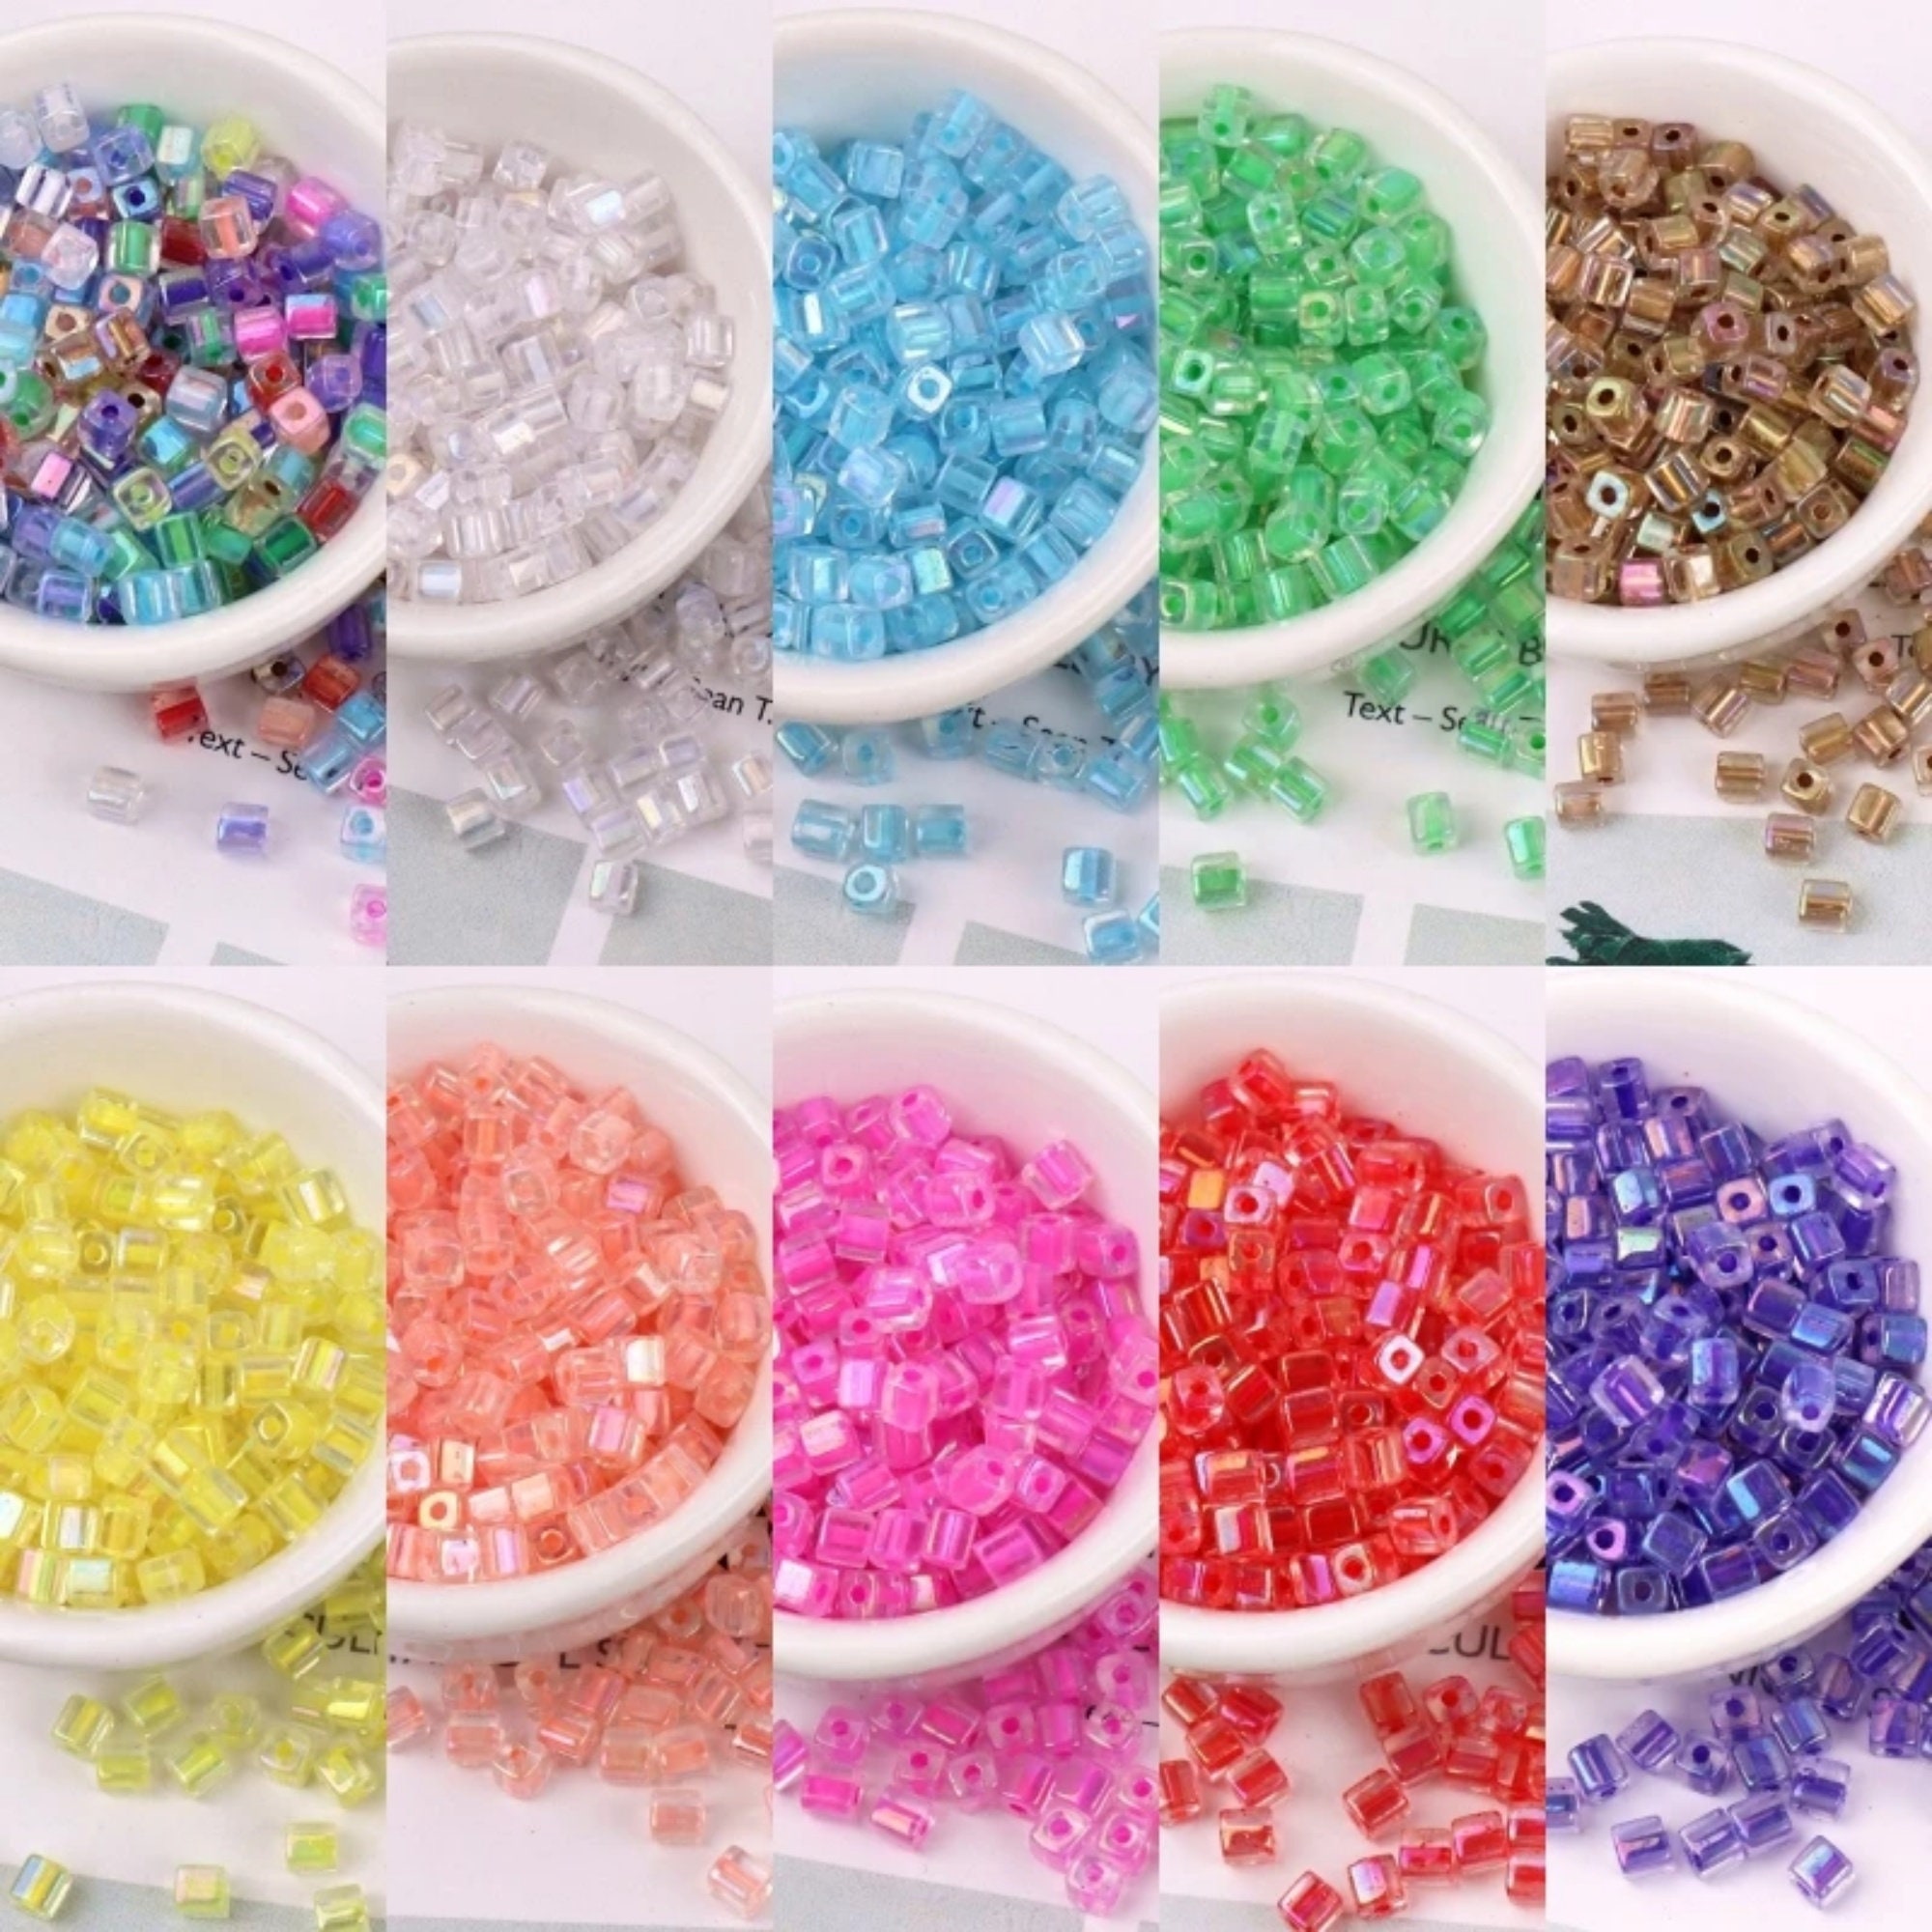 30pcs/lot 8mm AB Colorful Austria Crystal Beads Flower Shape Shiny Loose  Spacer Beads for Jewelry Making Diy Bracelets Necklaces